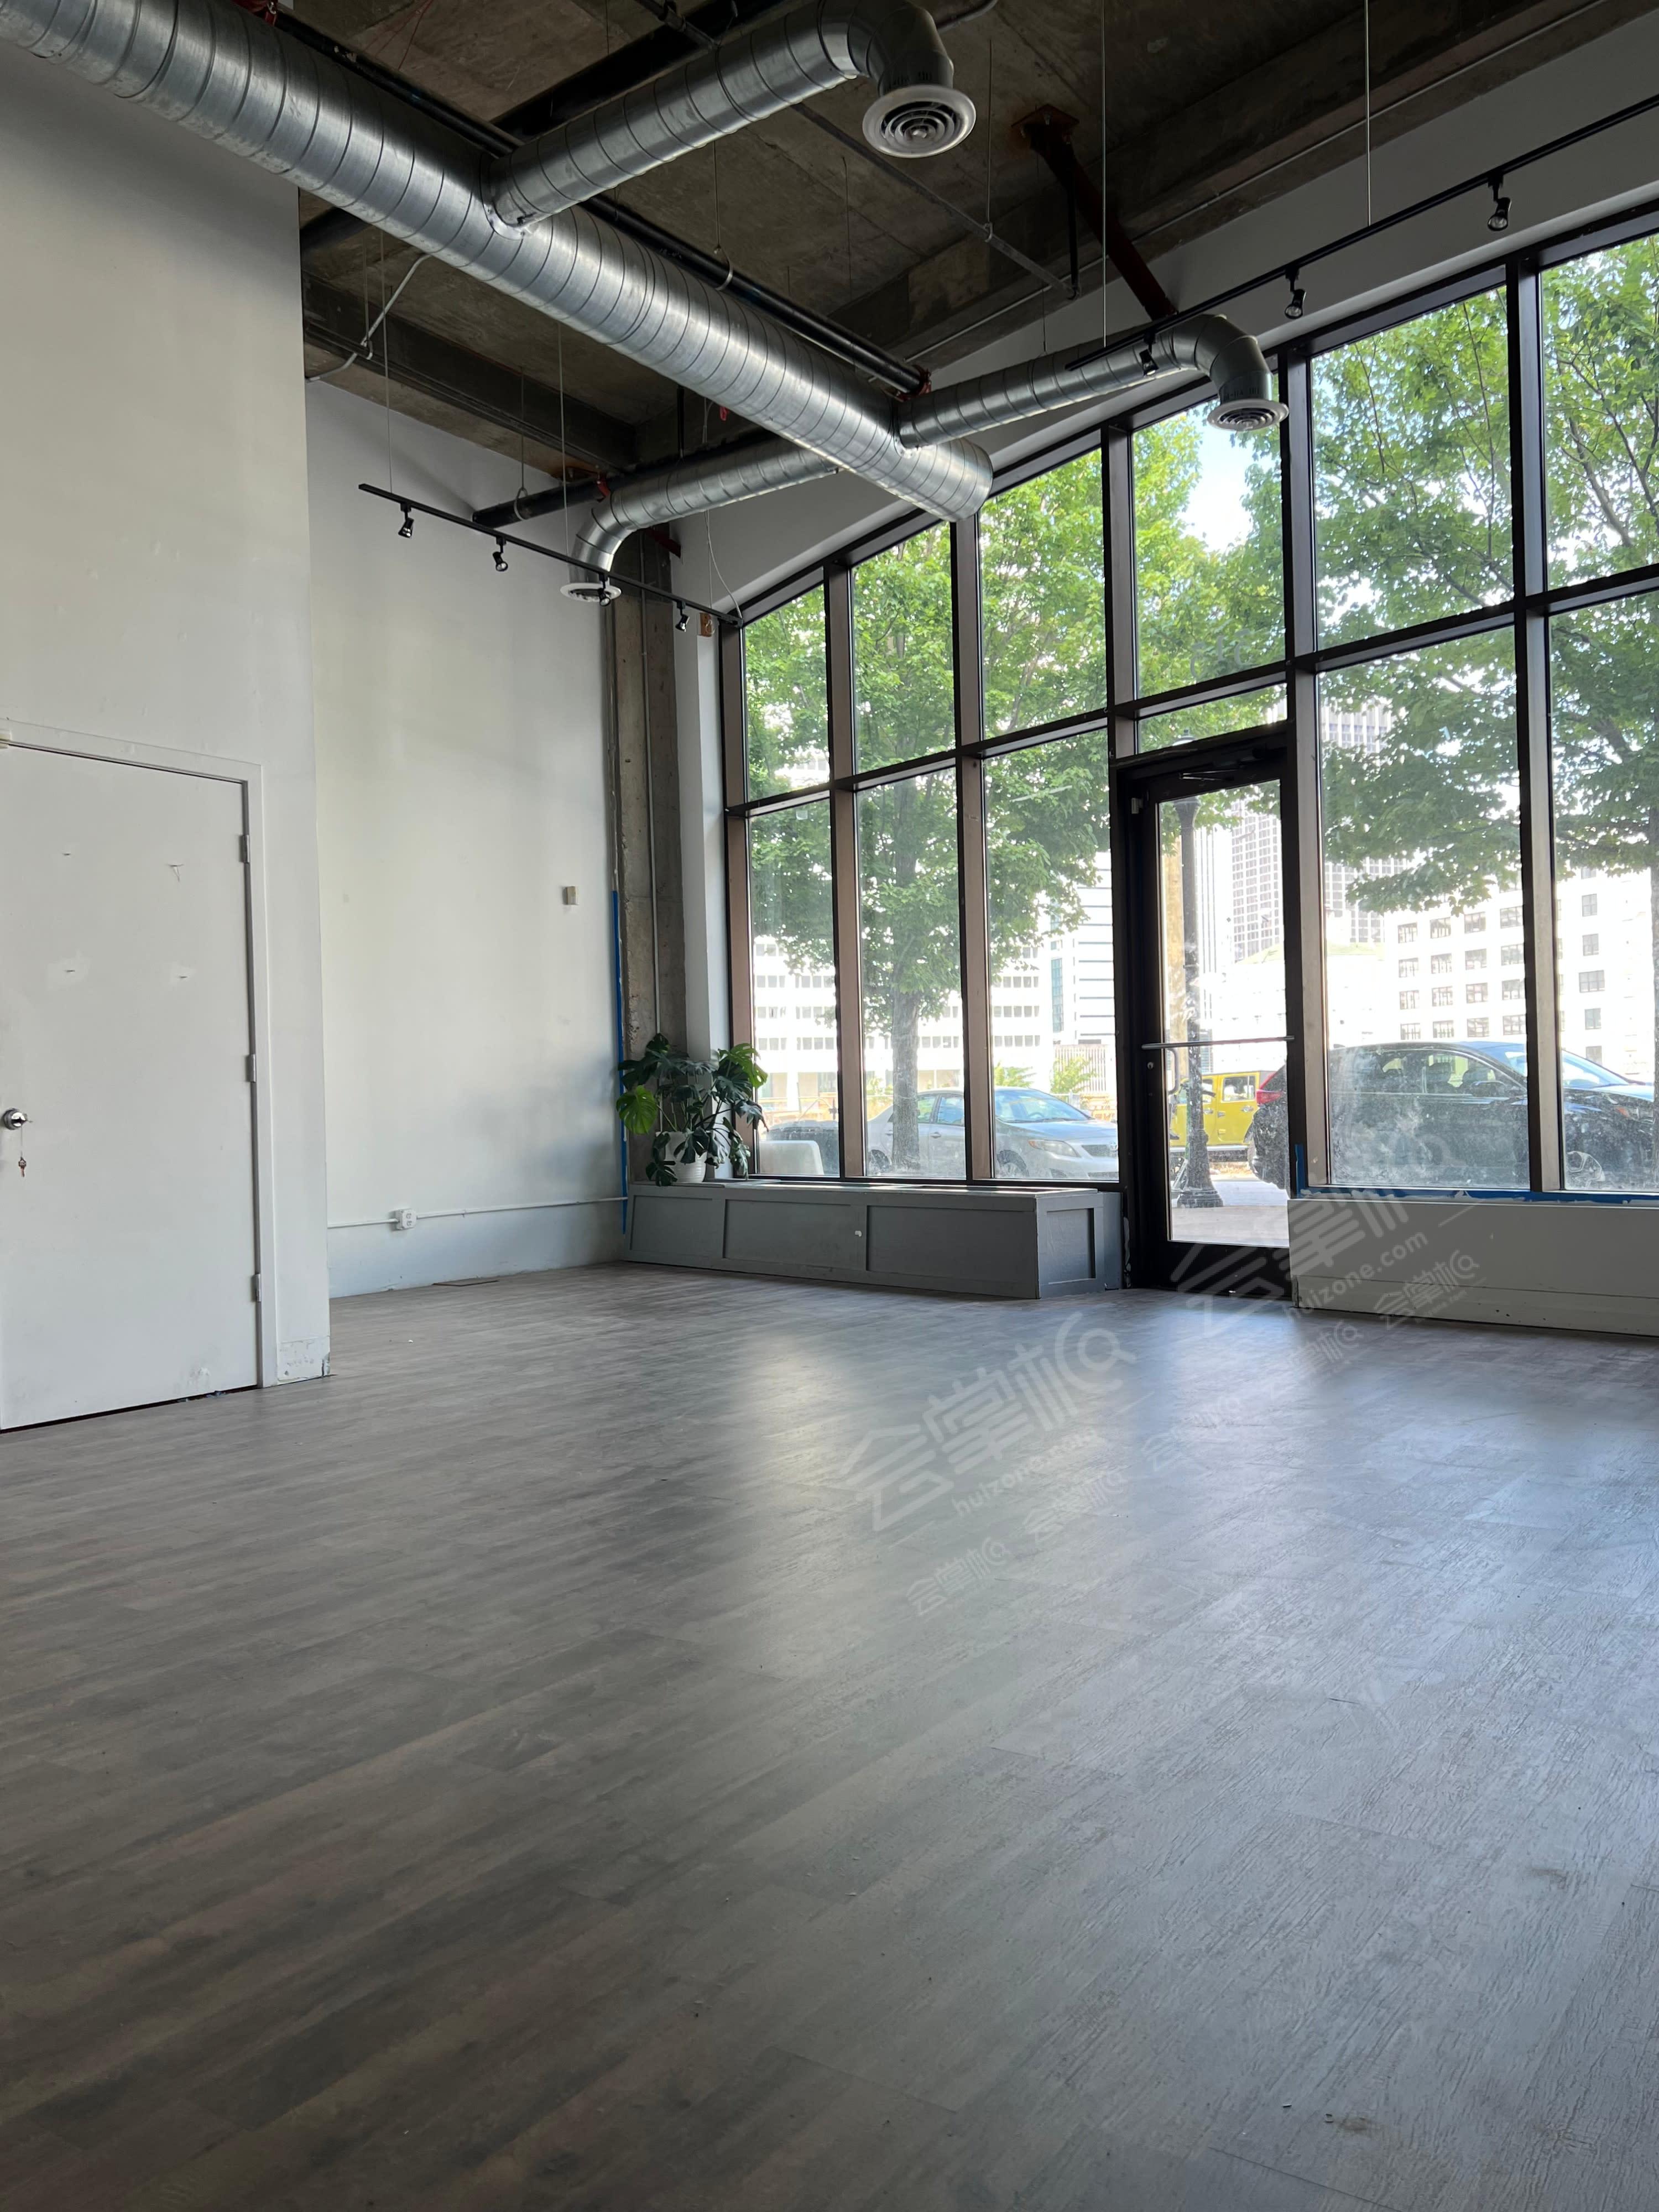 Downtown Event/Photo Studio Space! Tons of natural light! Great Location! WEEKDAY DISCOUNTS!!